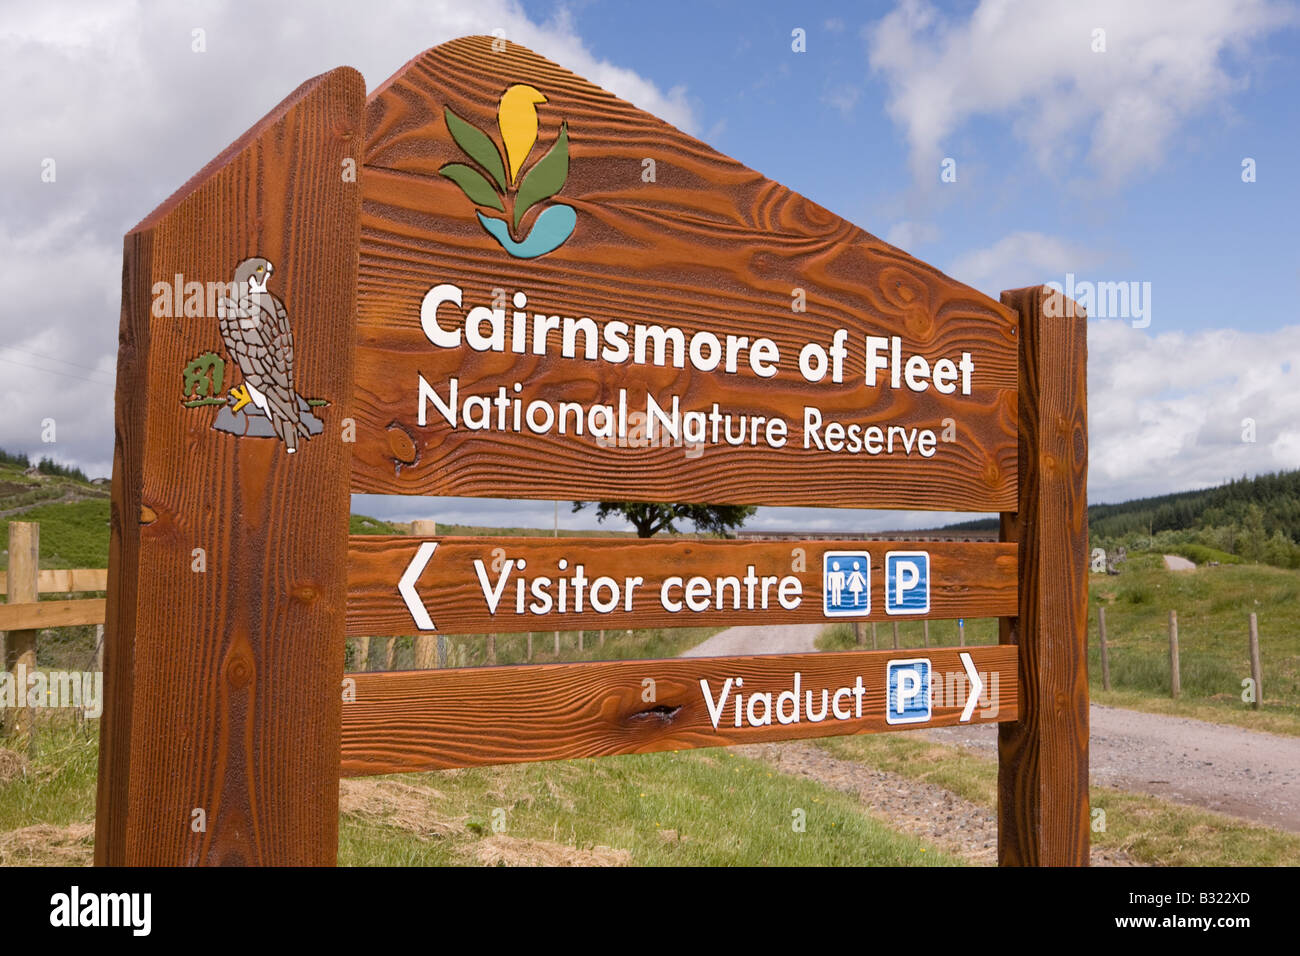 Scottish Natural Heritage Cairnsmore of Fleet National Nature Reserve sign in Galloway Scotland UK Stock Photo